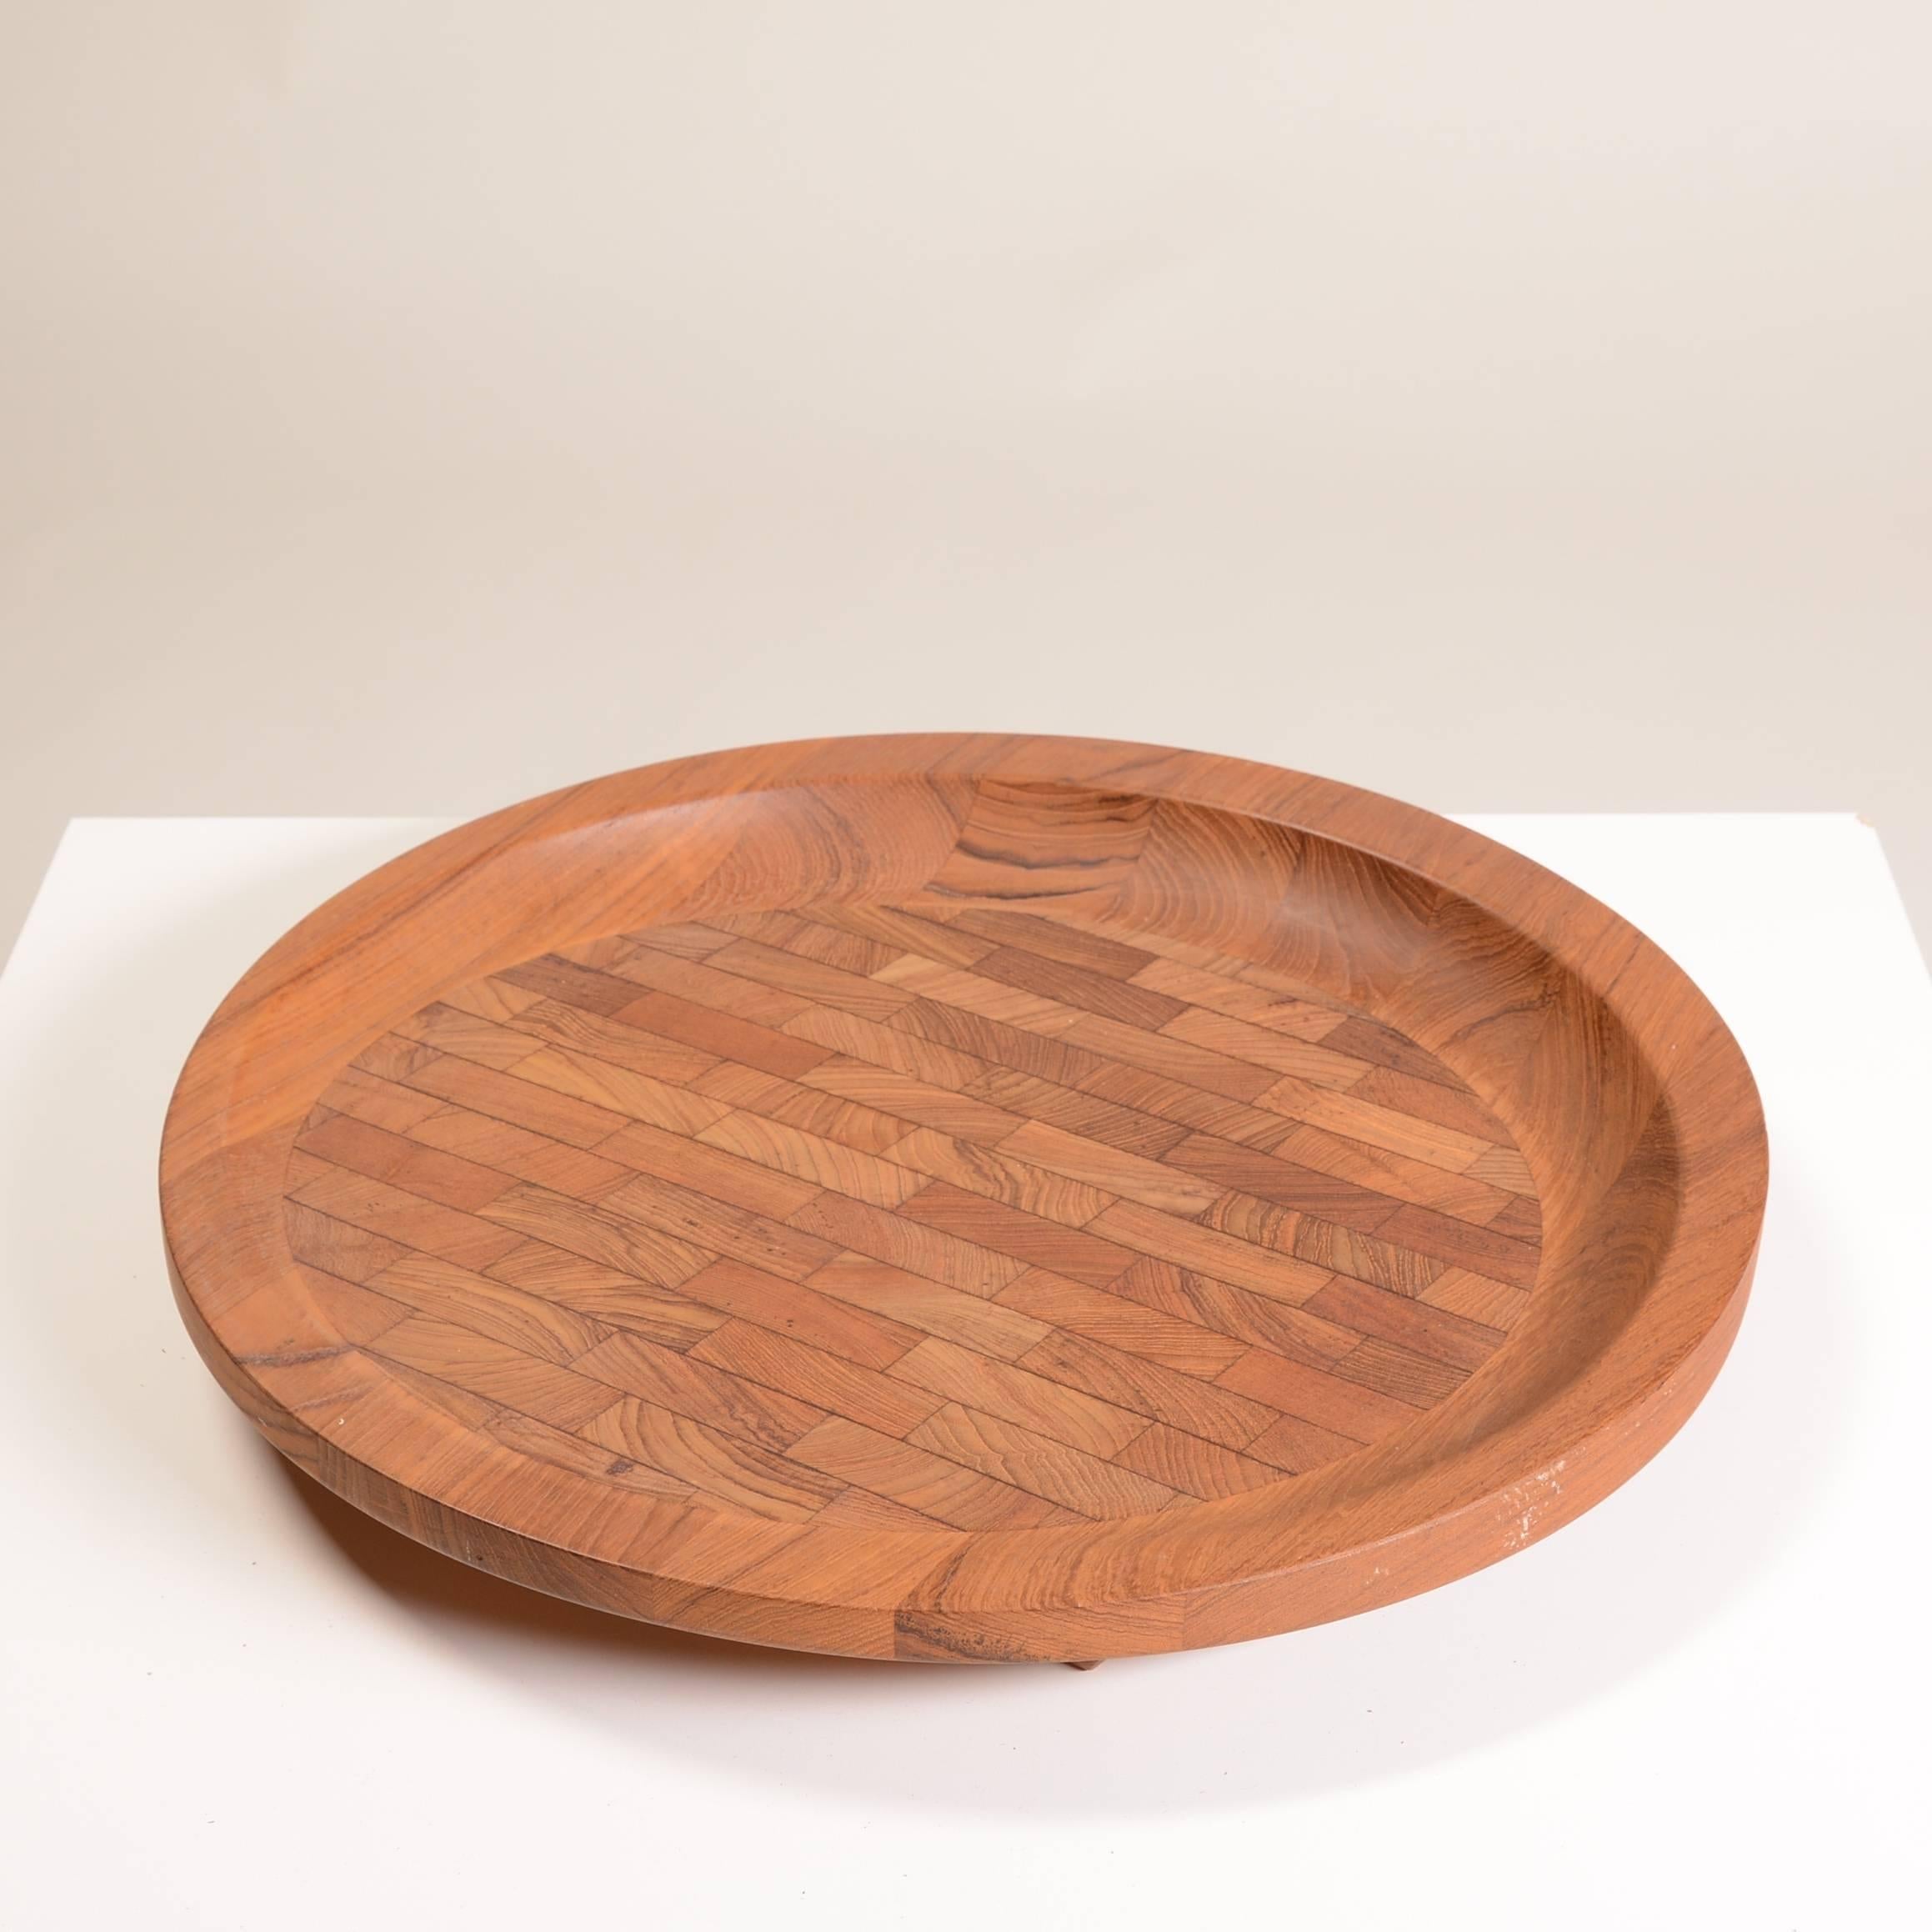 Large teak Dansk circular round cutting board designed by Dansk's primary designer Jens Quistgaardin. In the original catalog this is called a 